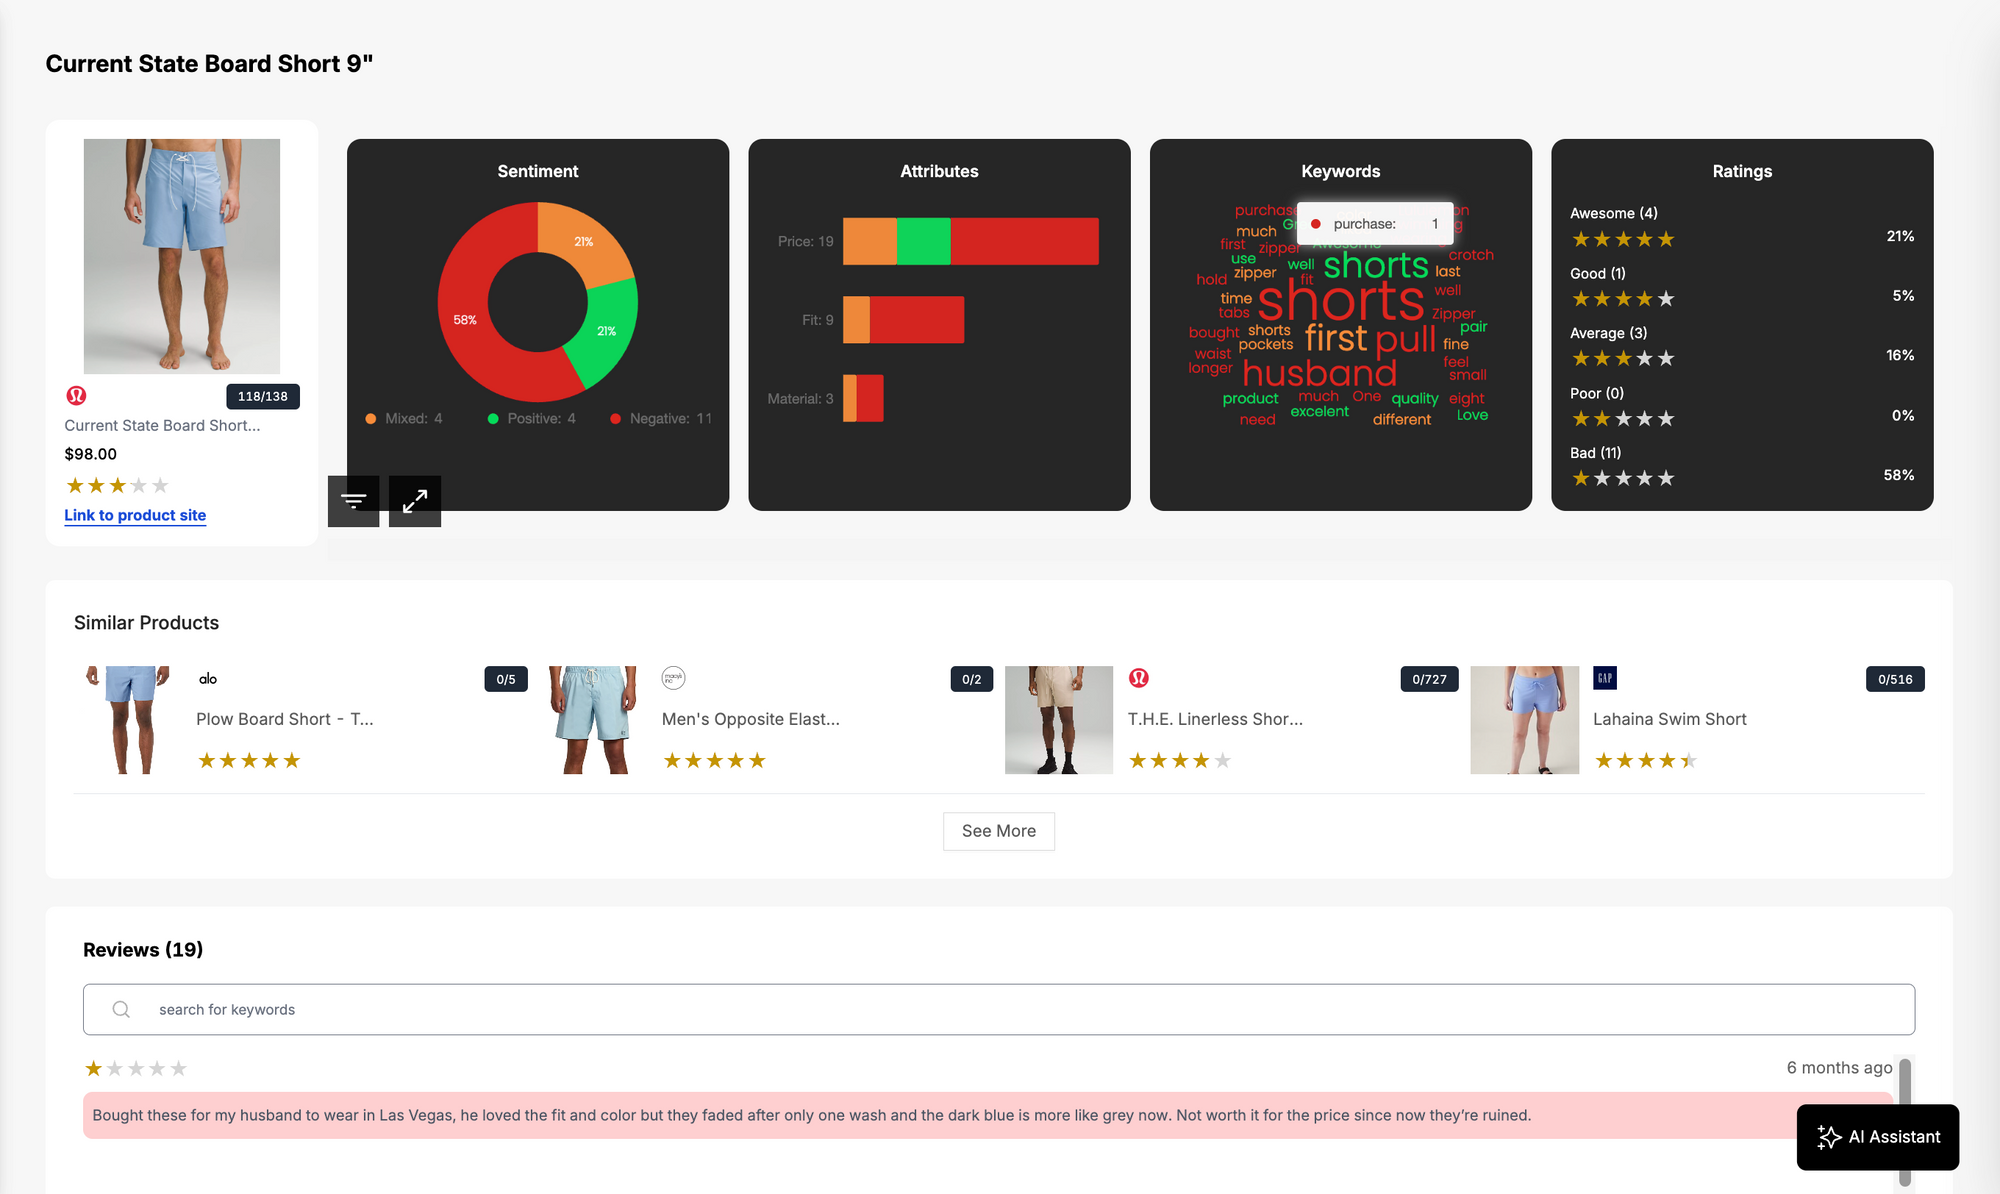 Woven Insights dashboard, showing insights into the price of a pair of shorts, based on AI-powered analysis of its customer reviews.